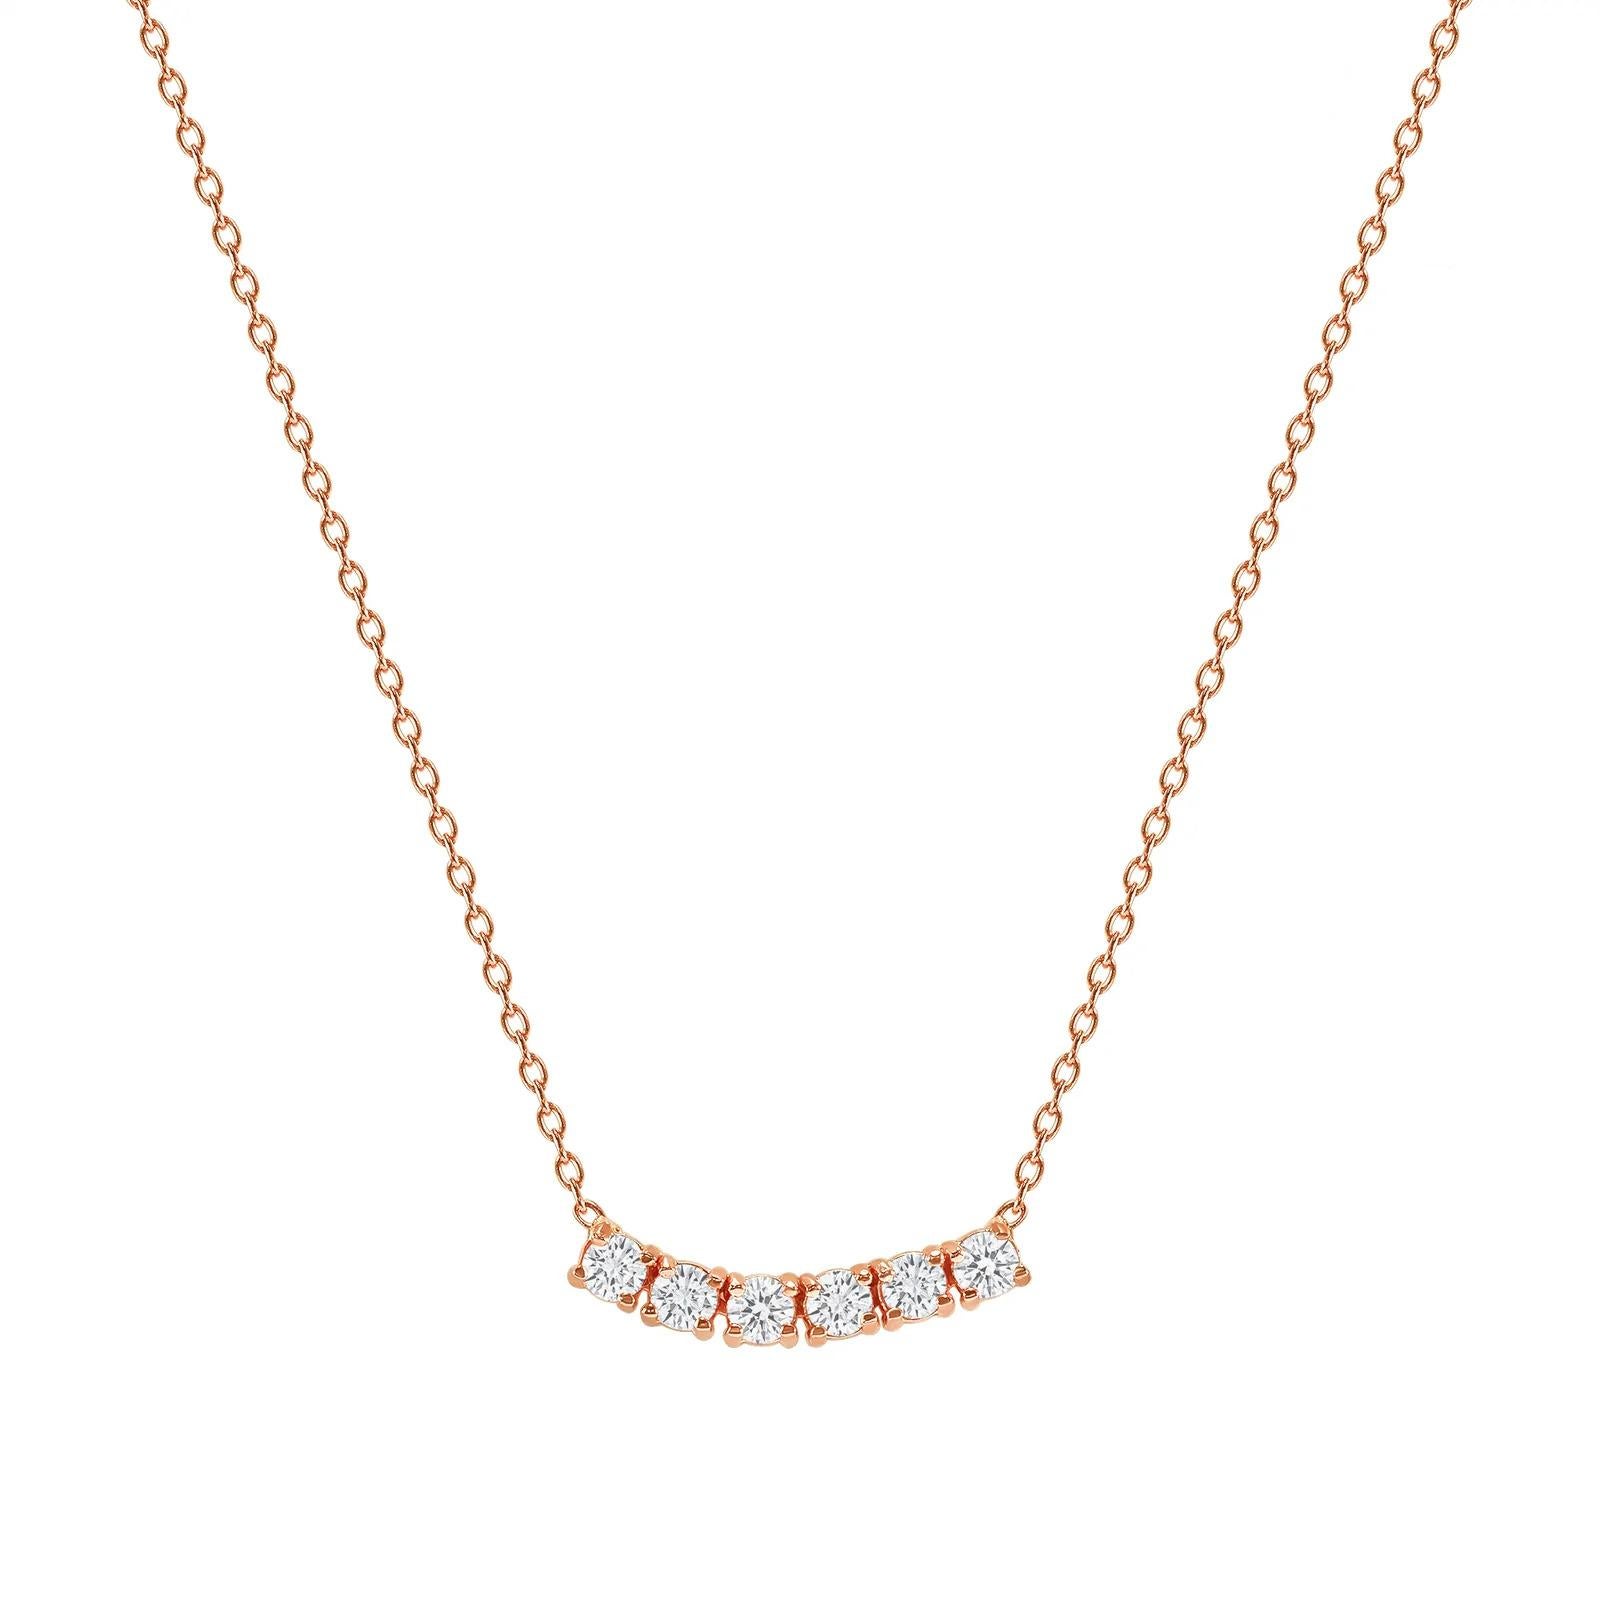 This petite, curved diamond necklace is crafted with gorgeous 14k gold set with six round diamonds.  

Gold: 14k 
Diamond Total Carats: 1.5 ct
Diamond Cut: Round (6 diamonds)
Diamond Clarity: VS
Diamond Color: F
Color: Rose Gold
Necklace Length: 16